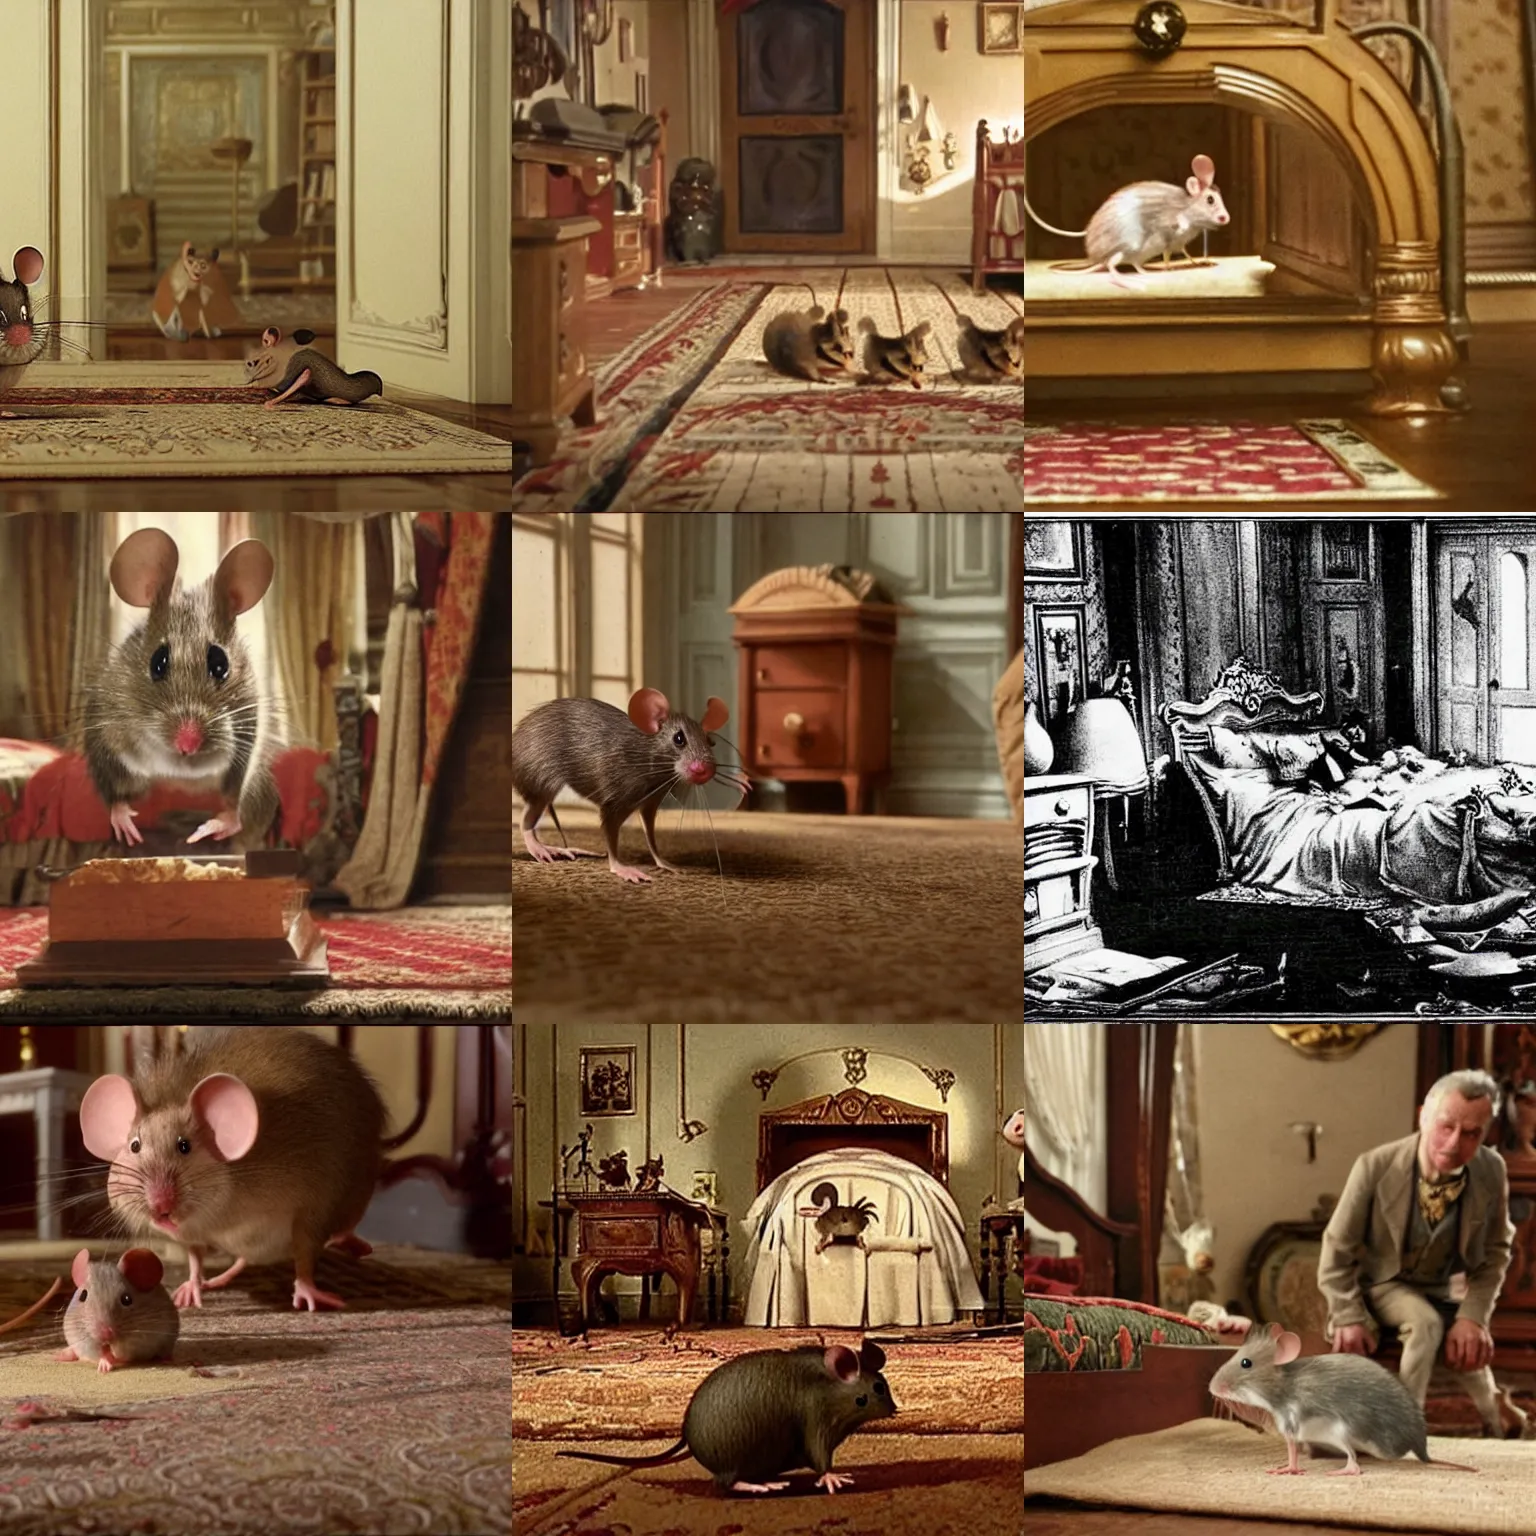 Prompt: a still from the movie mousehunt of the mouse in his bedroom